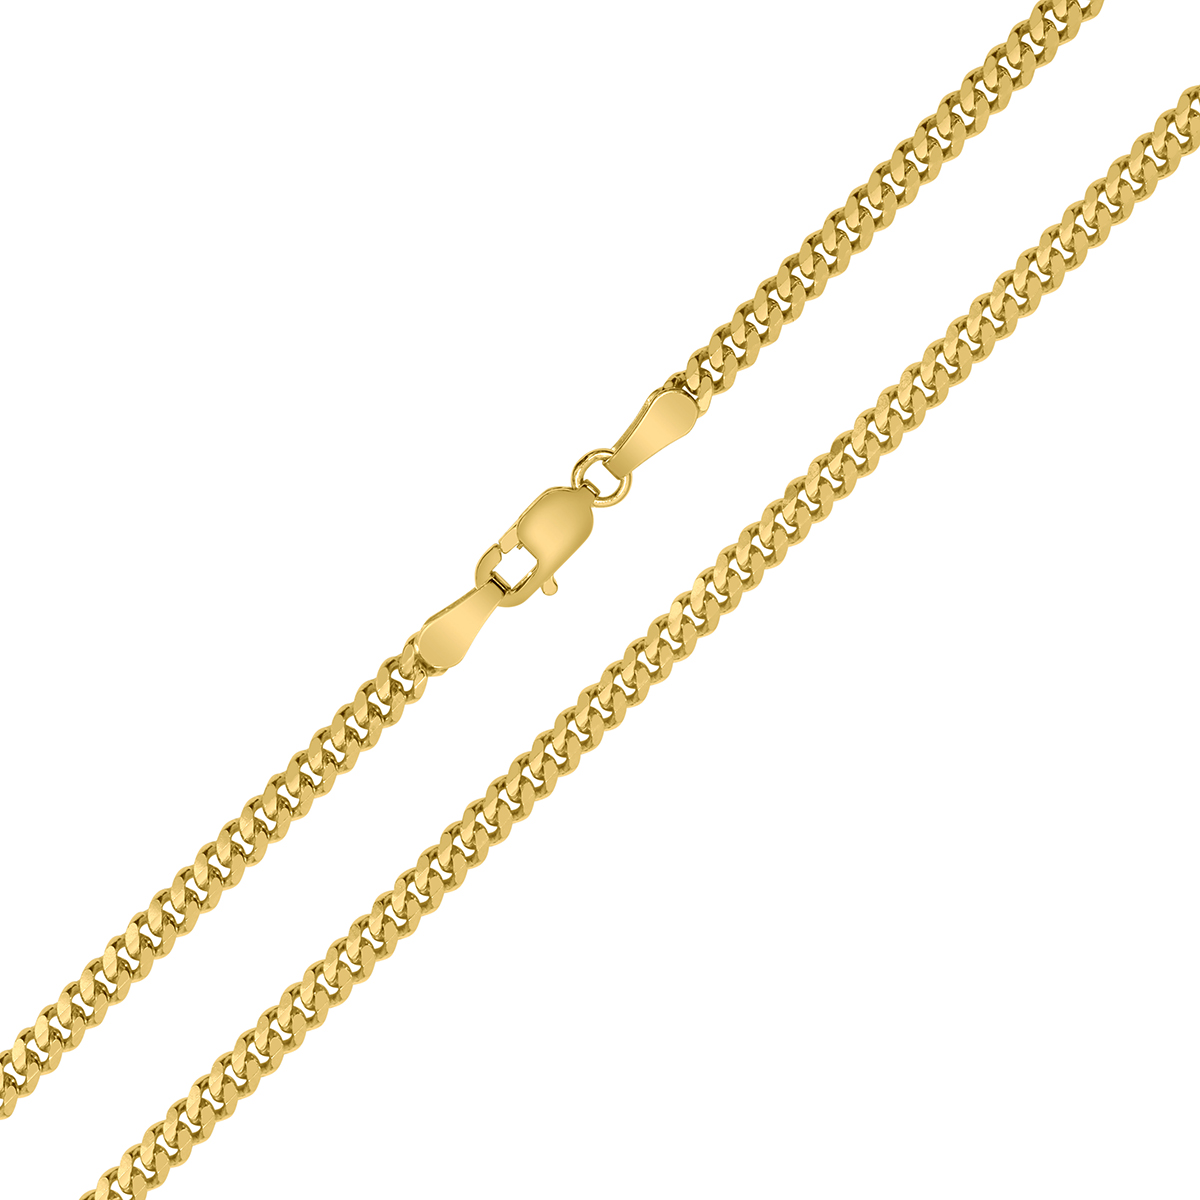 14K Yellow Gold 3mm Diamond Cut Gourmette Chain with Lobster Clasp - 18 Inch